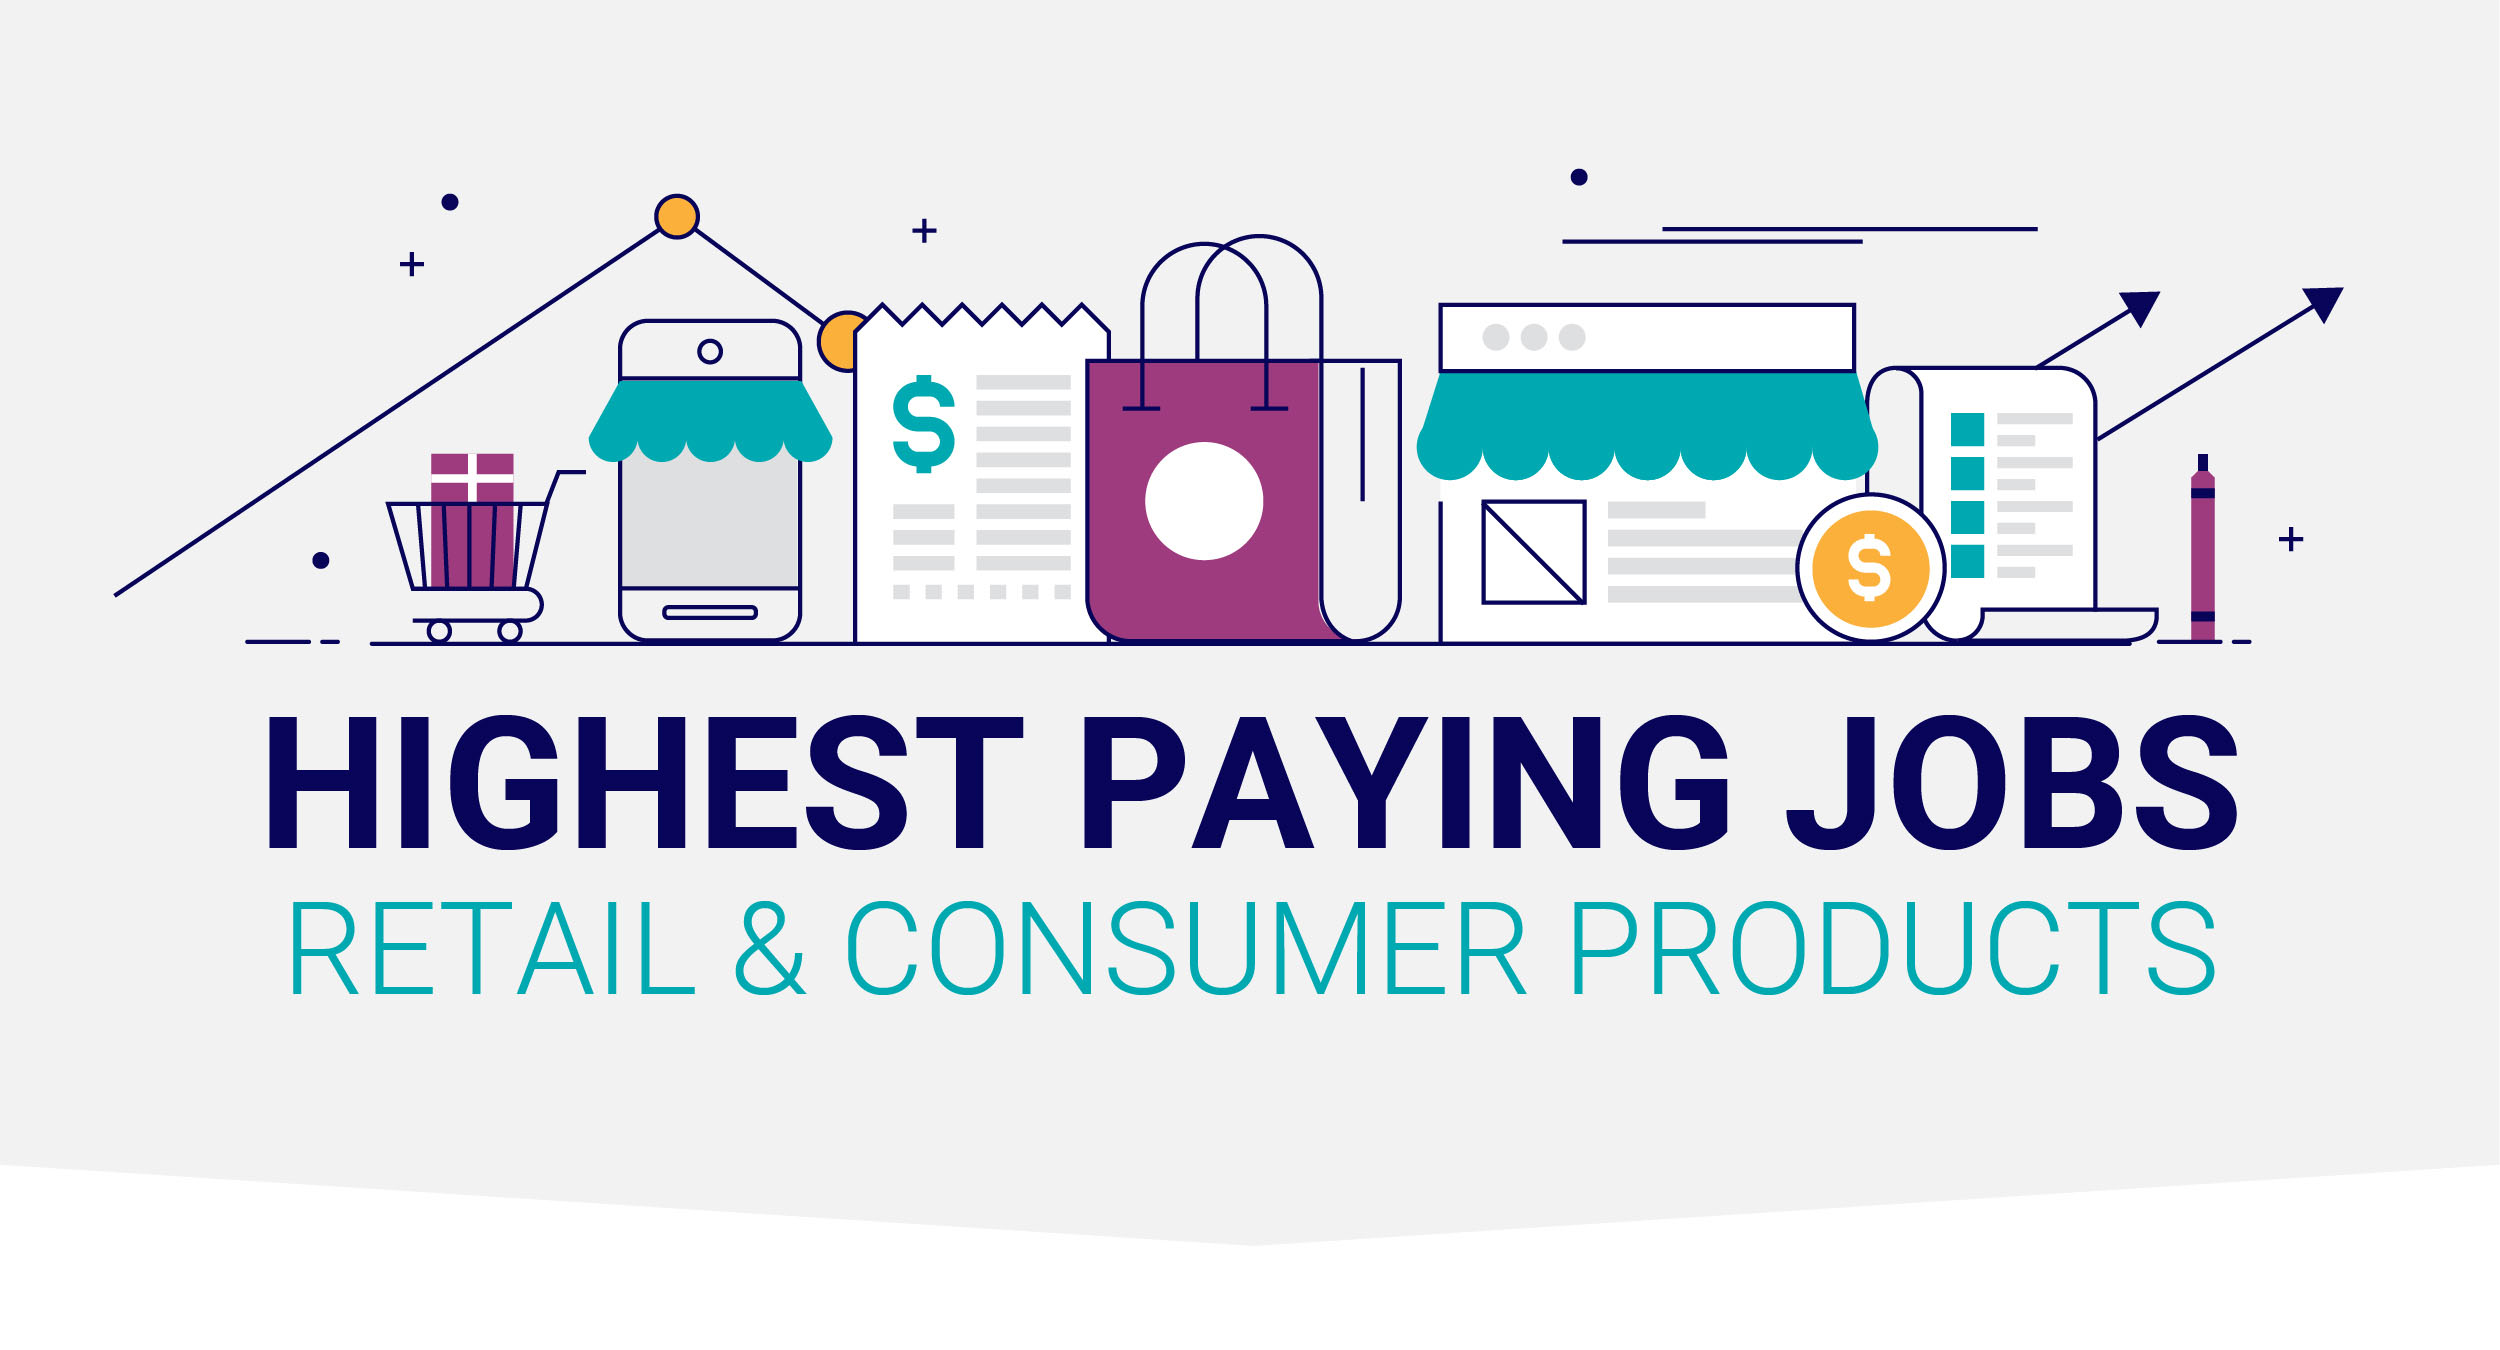 Highest Paying Jobs Retail & Consumer Products industry